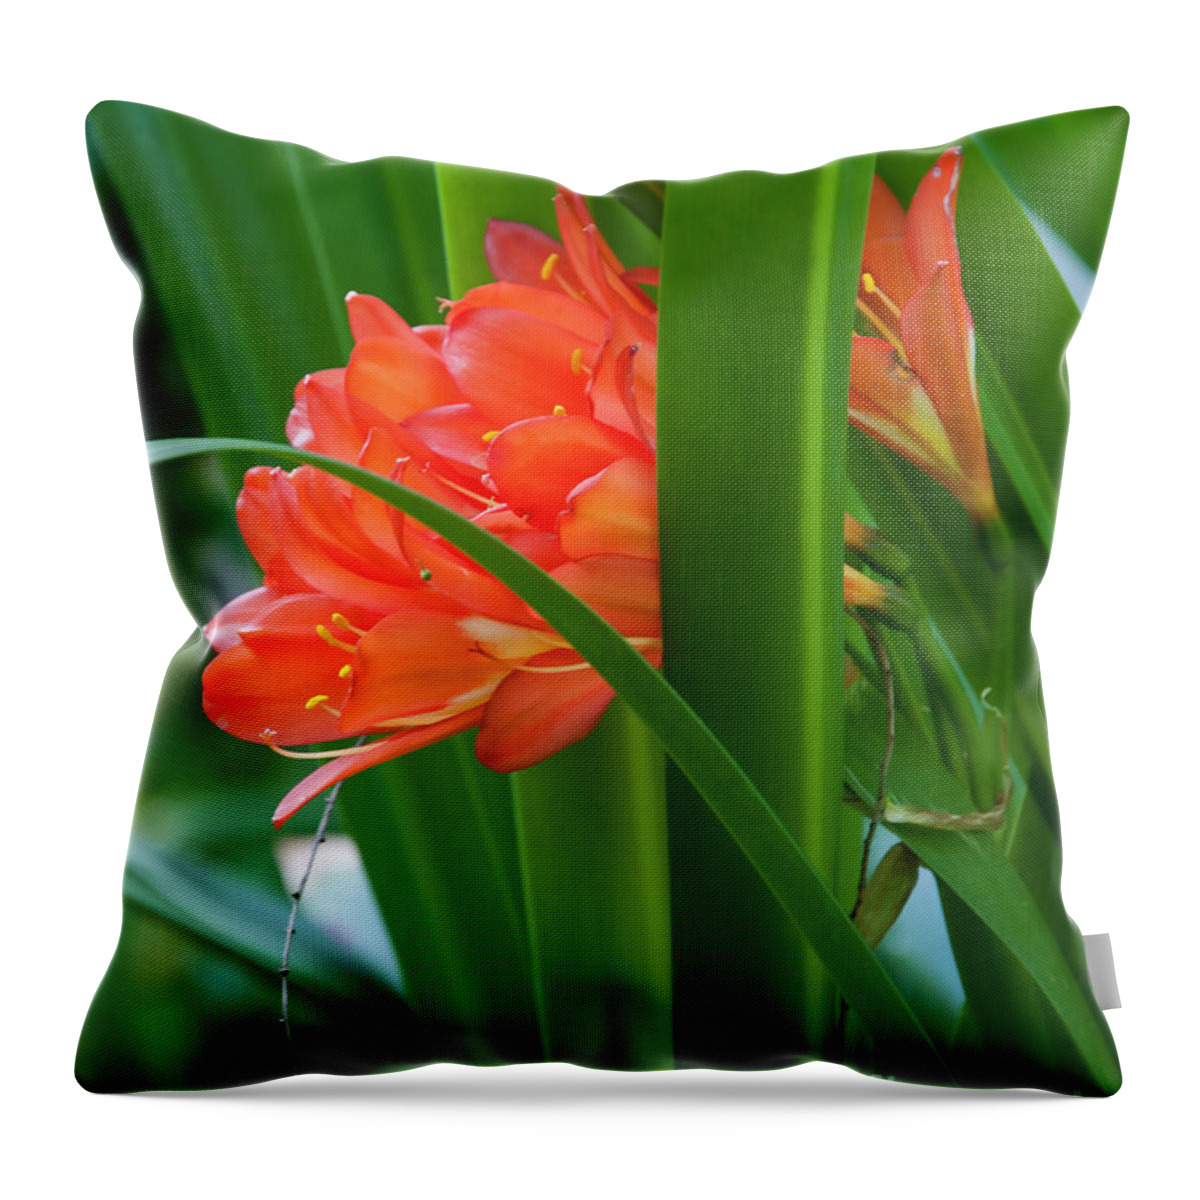 Floral Throw Pillow featuring the photograph Orange Brilliance Peeking Out Between The Leaves by Kirt Tisdale